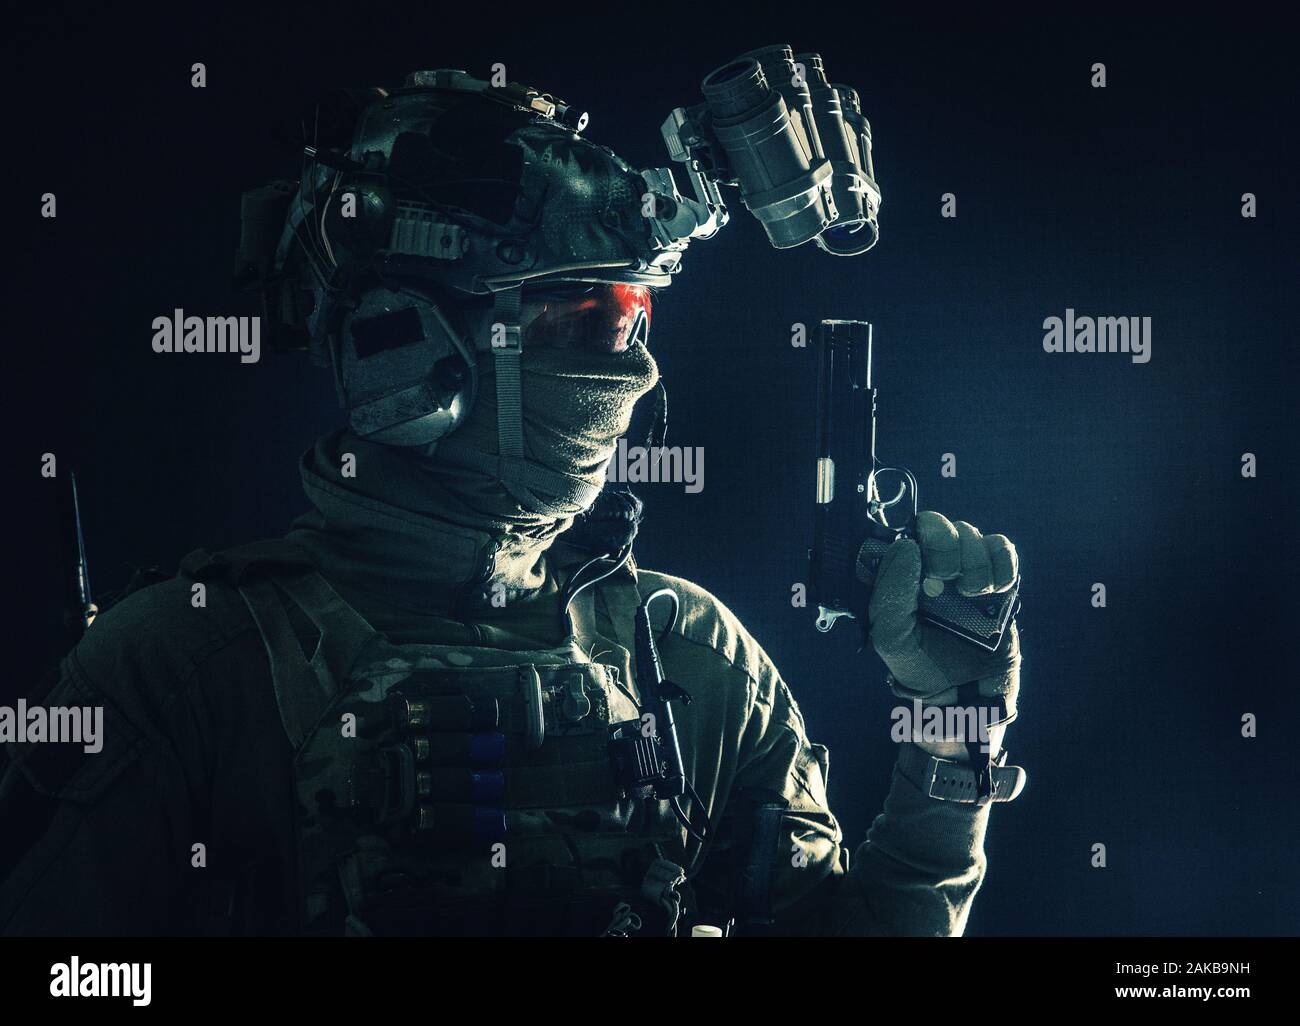 Combatant armed with service pistol in darkness Stock Photo